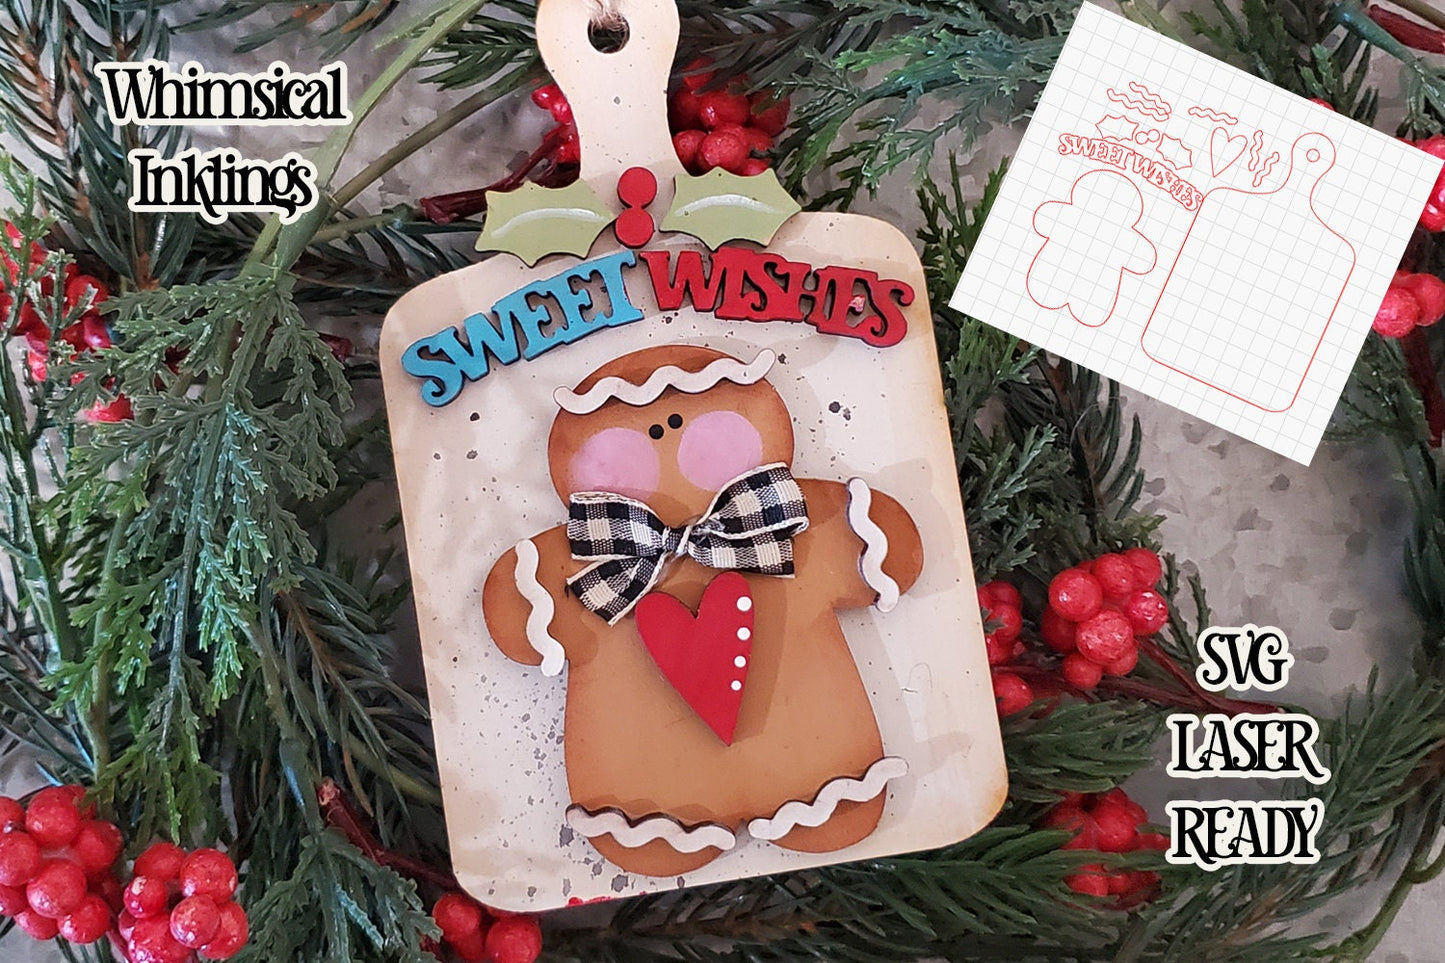 Sweet Wishes Gingerbread Ornament| Christmas SVG| Laser Cut Christmas Gingerbread| Glow forge| Ornament SVG